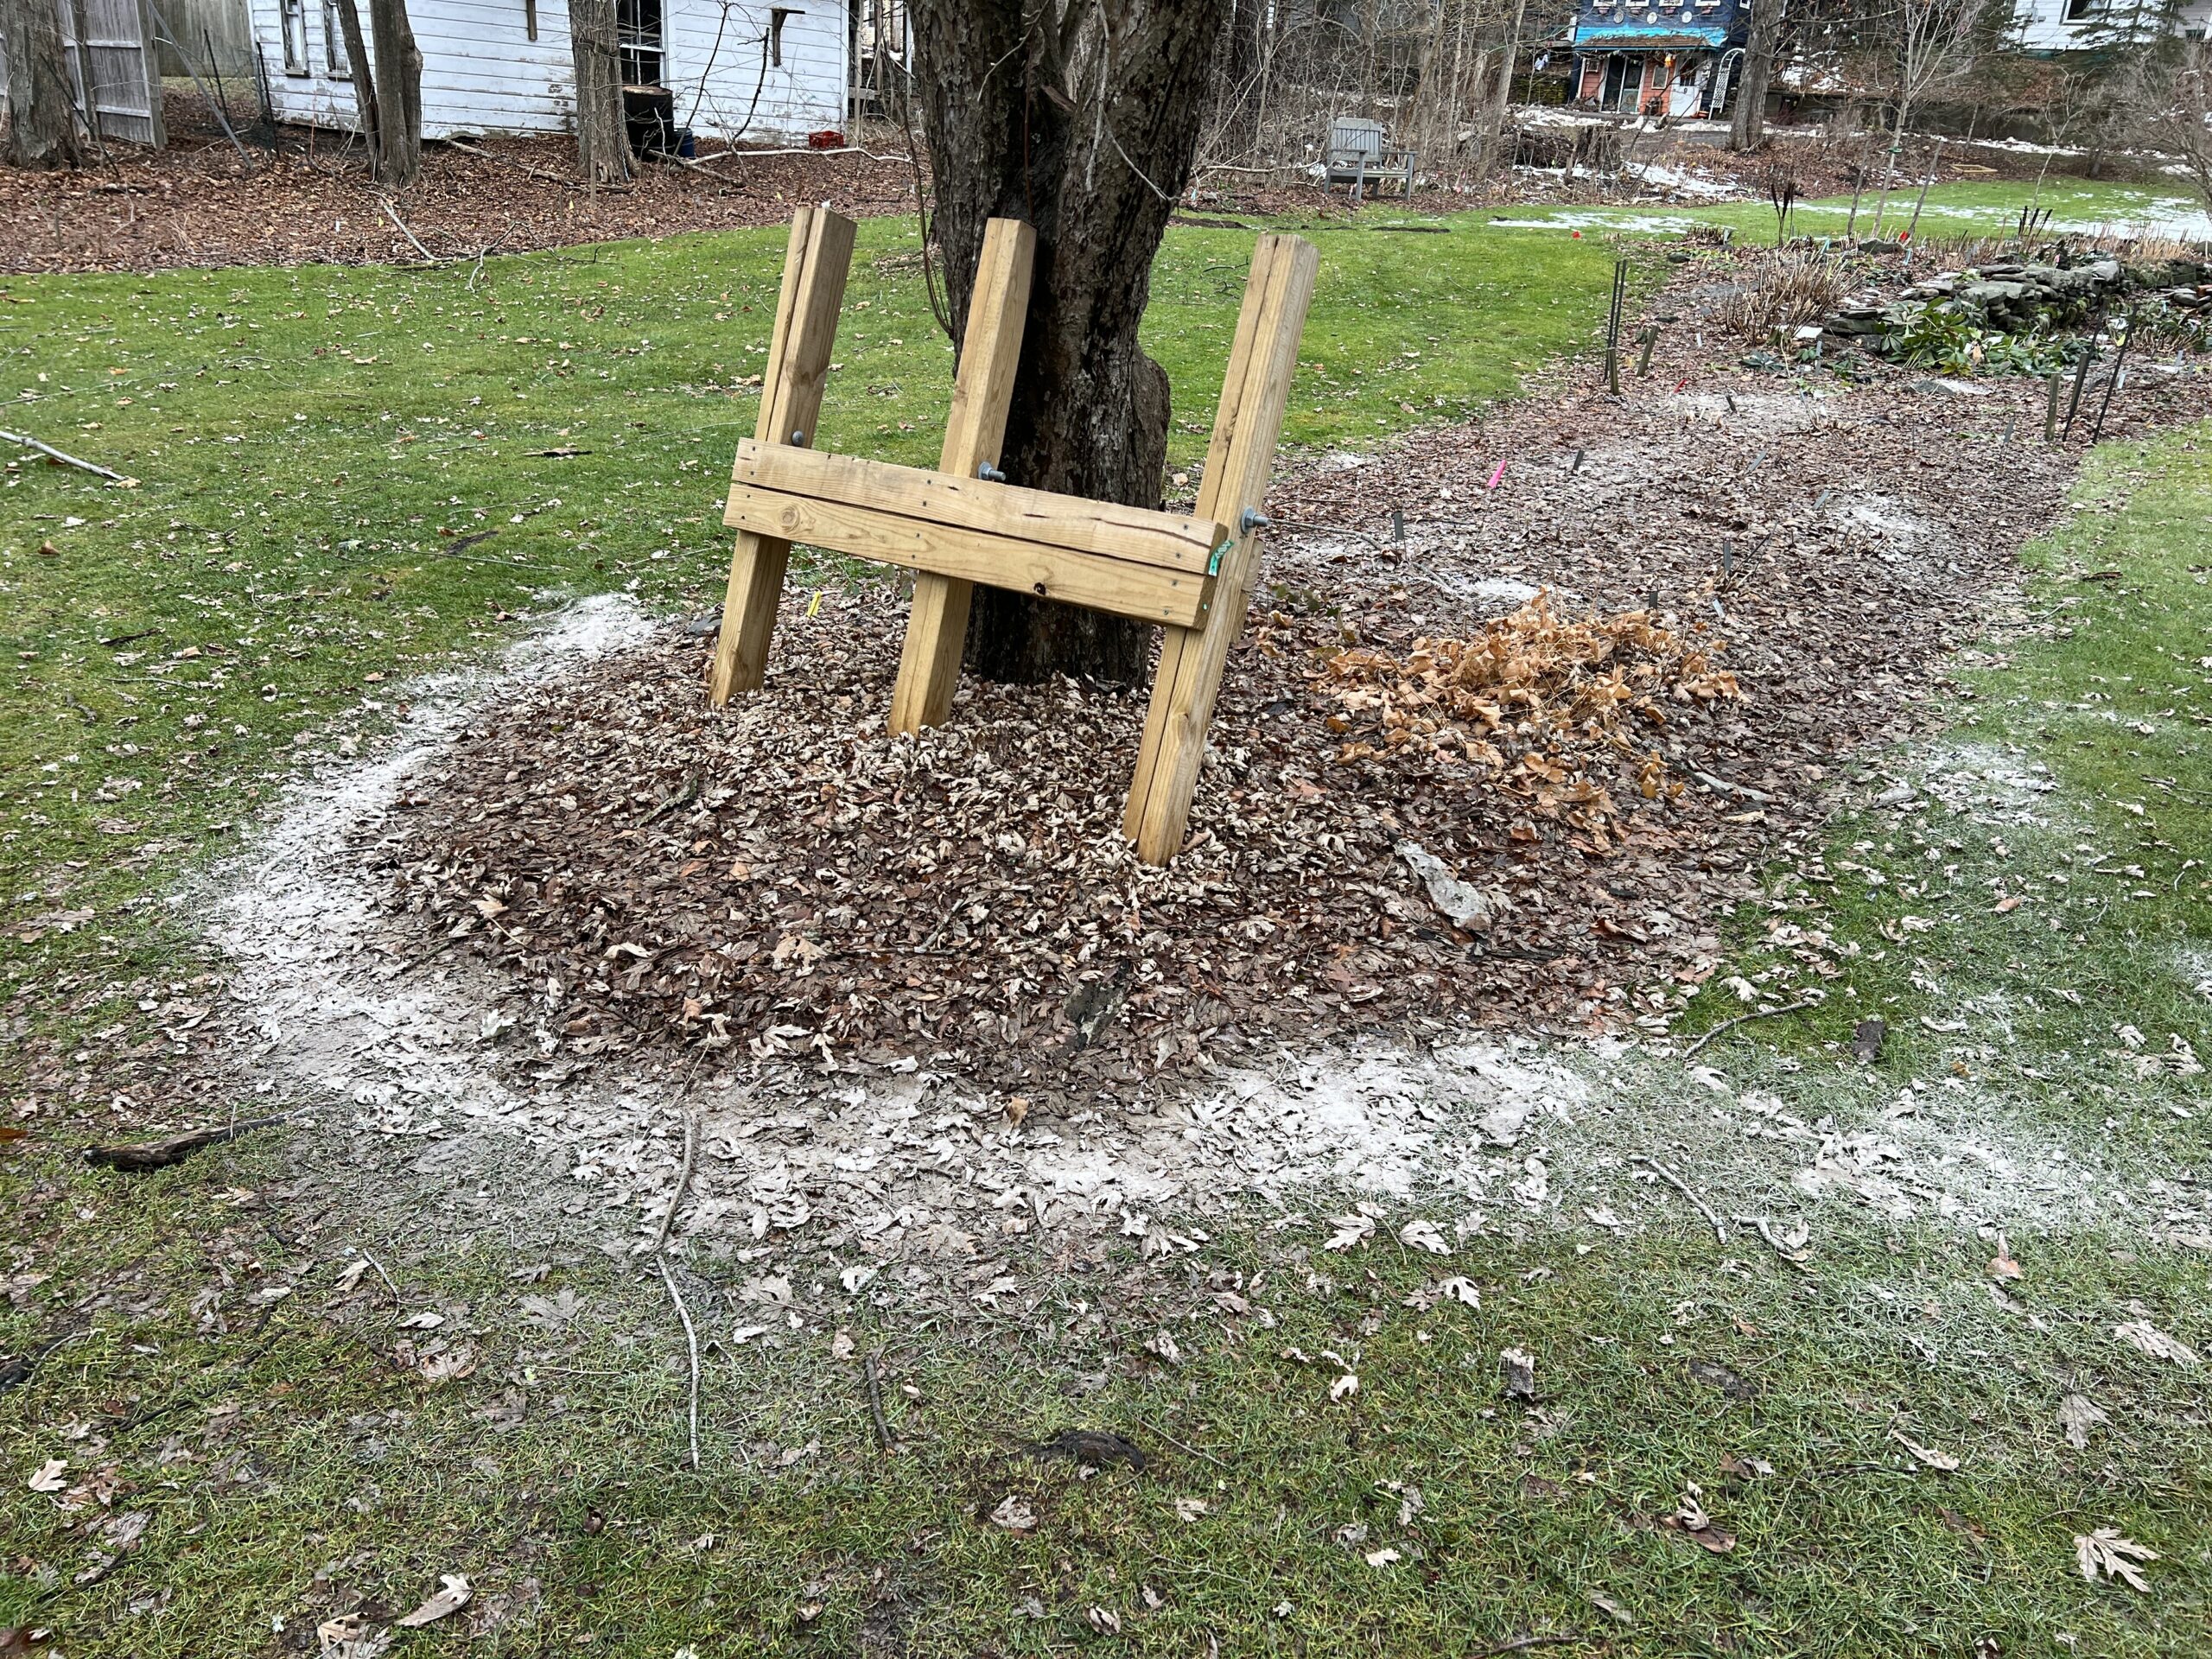 Wood ashes spread at the drip line of an old apple tree and into the perennial border. Don’t apply ashes to frozen ground as it will just wash away and be of little use to the plants. ANDREW MESSINGER